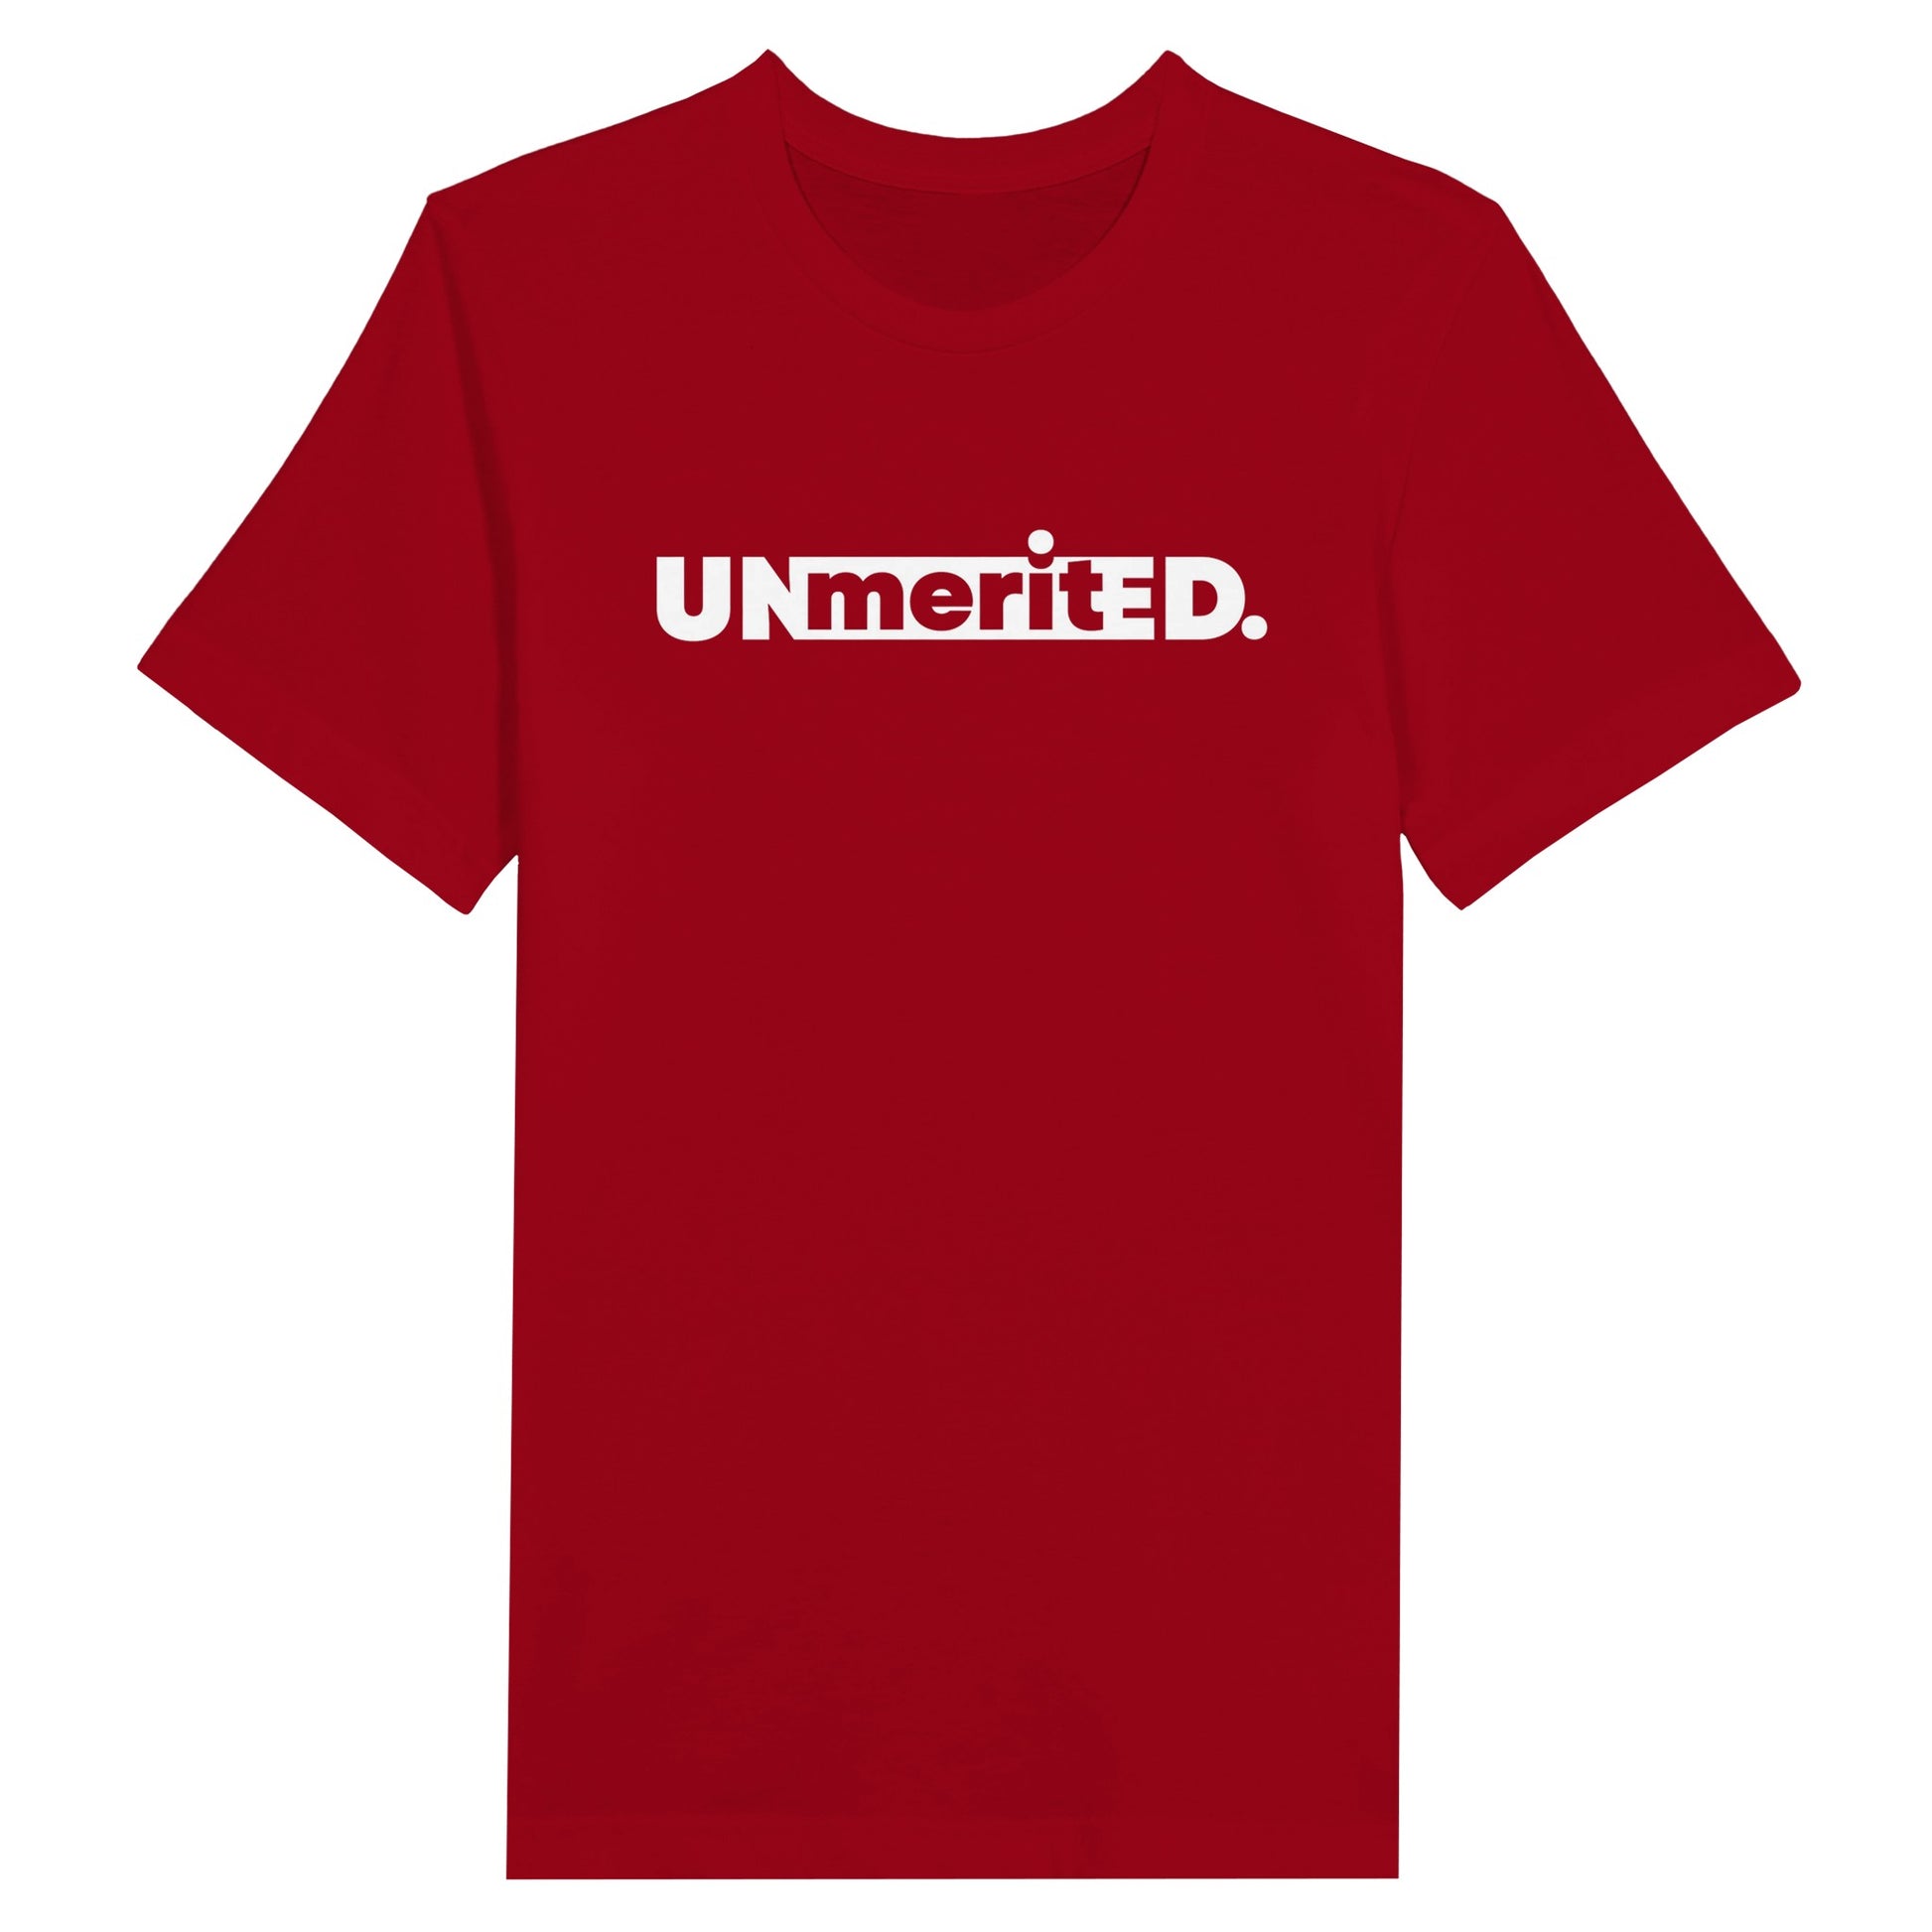 An image of UNmeritED | Premium Unisex Christian T-shirt available at 3rd Day Christian Clothing UK